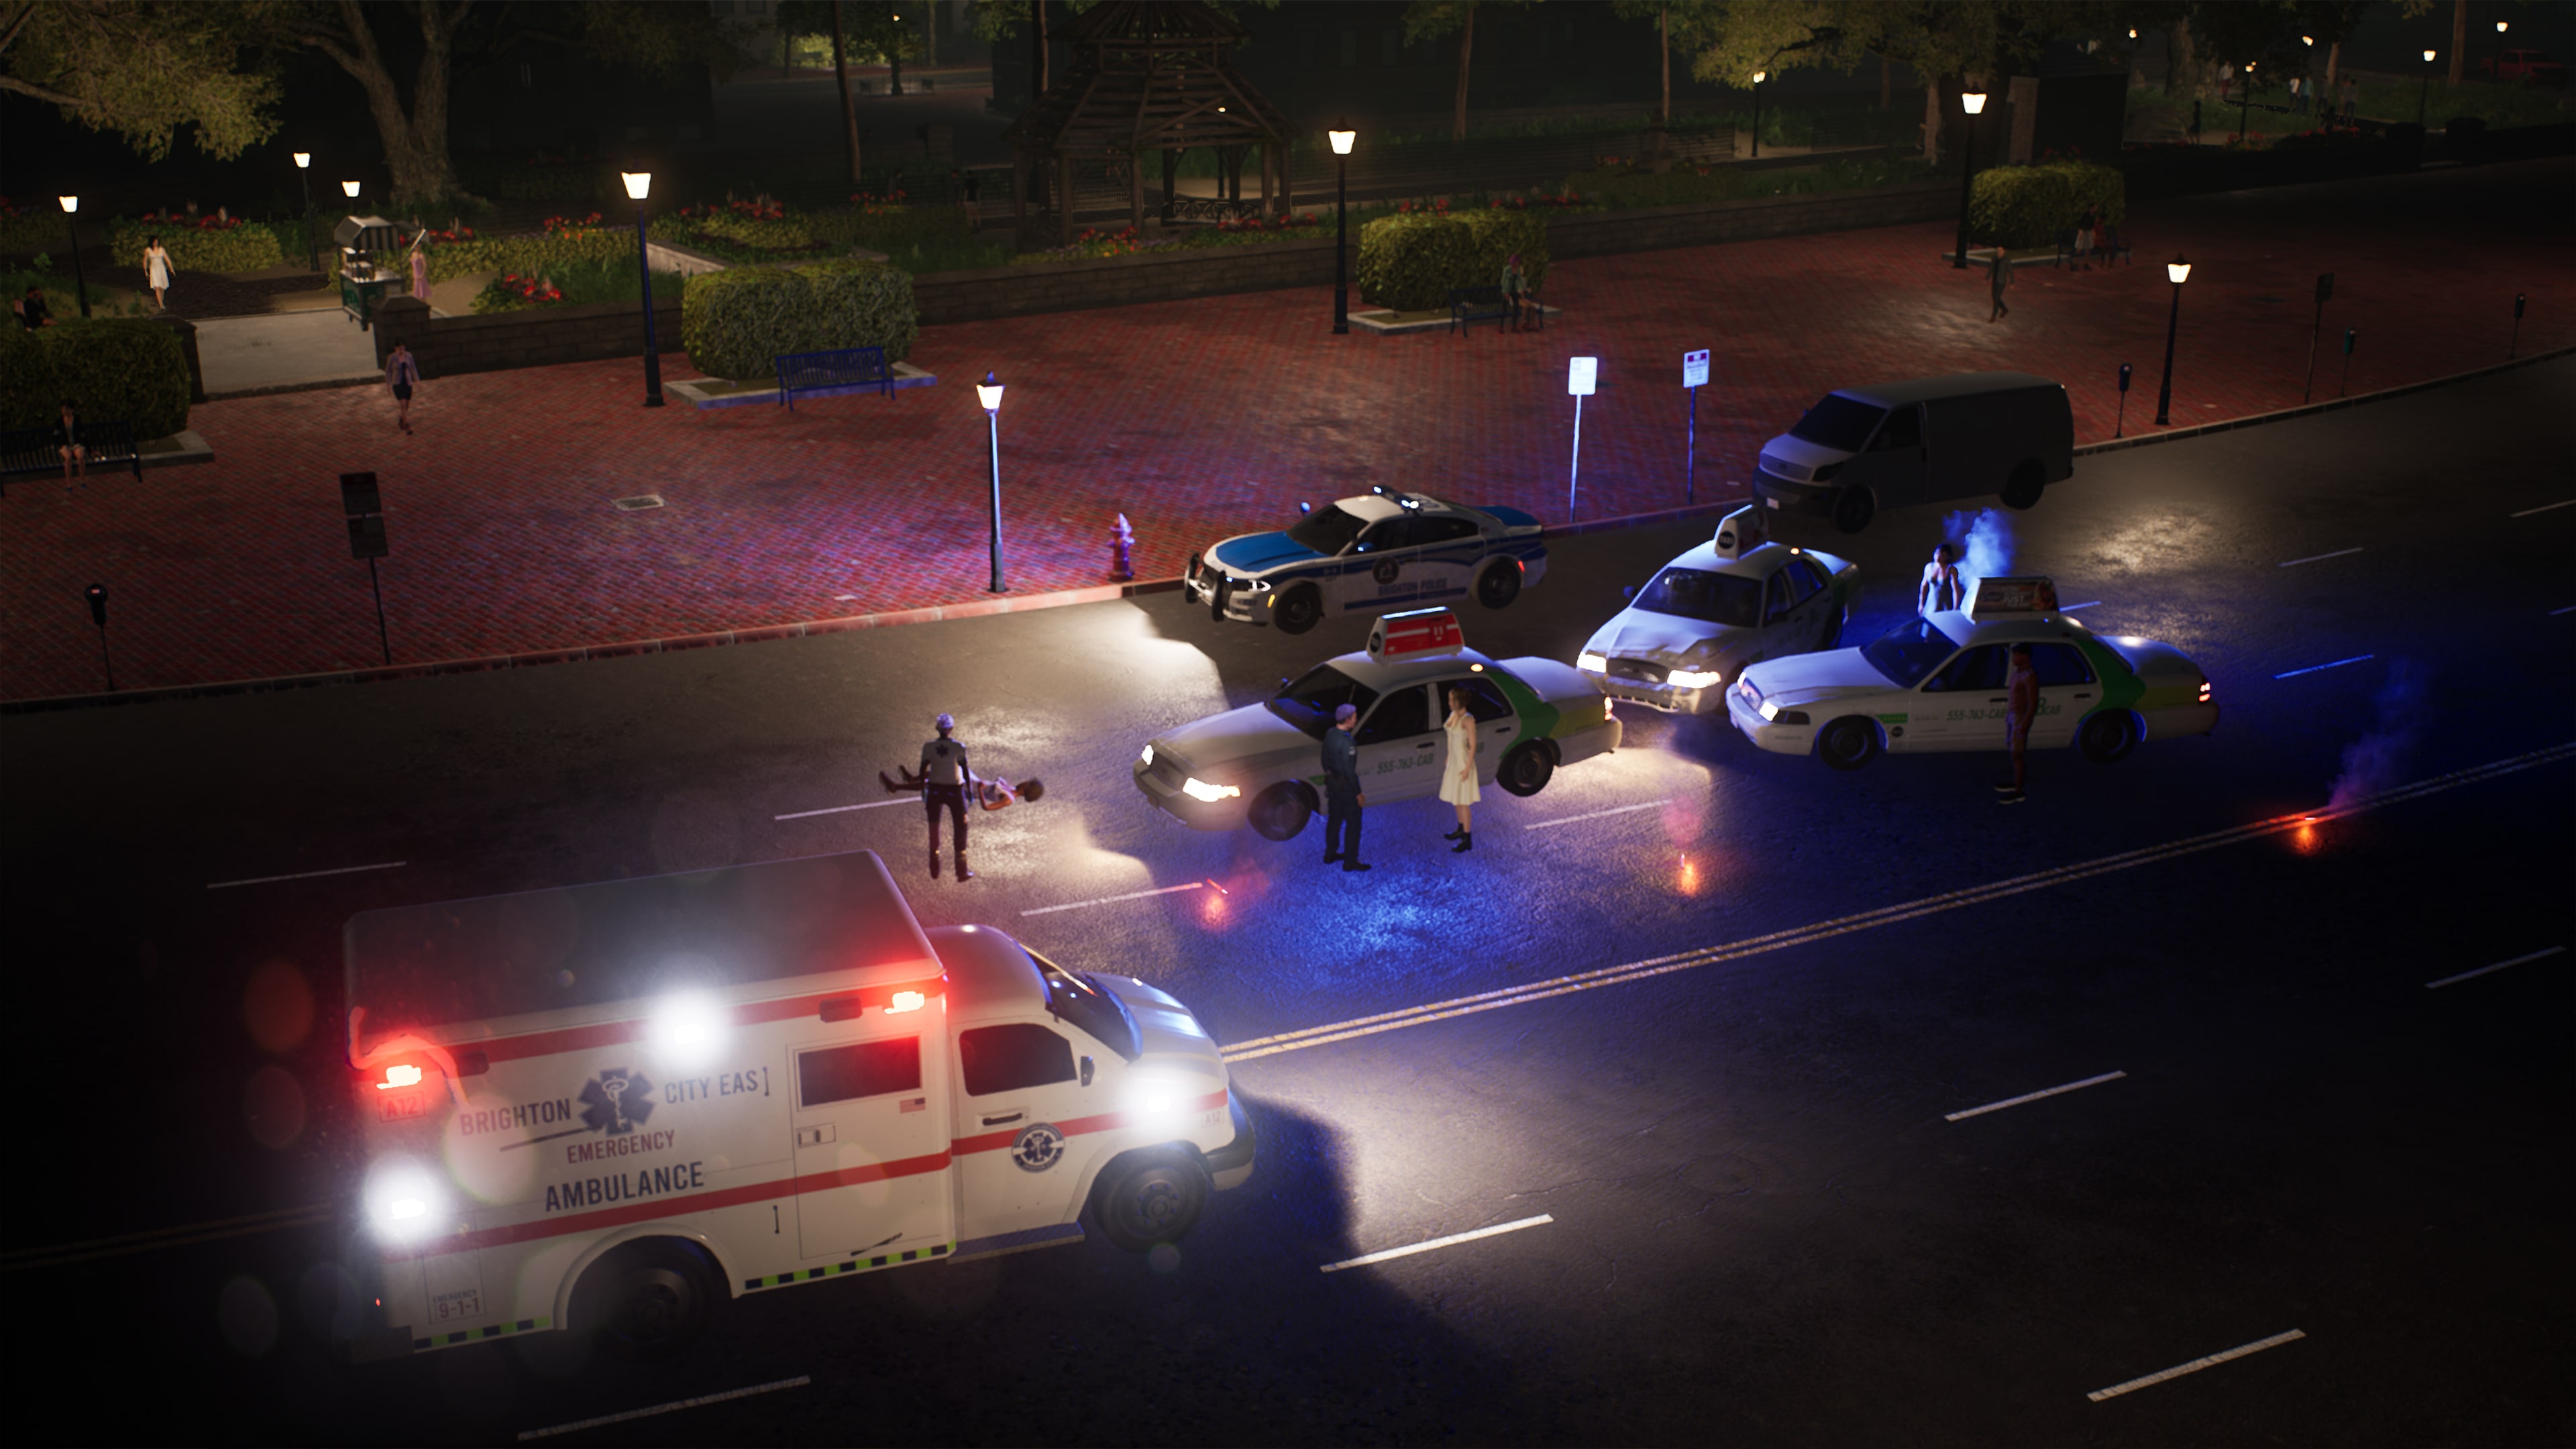 Police Simulator: Patrol Officers : Compact Police Vehicle DLC